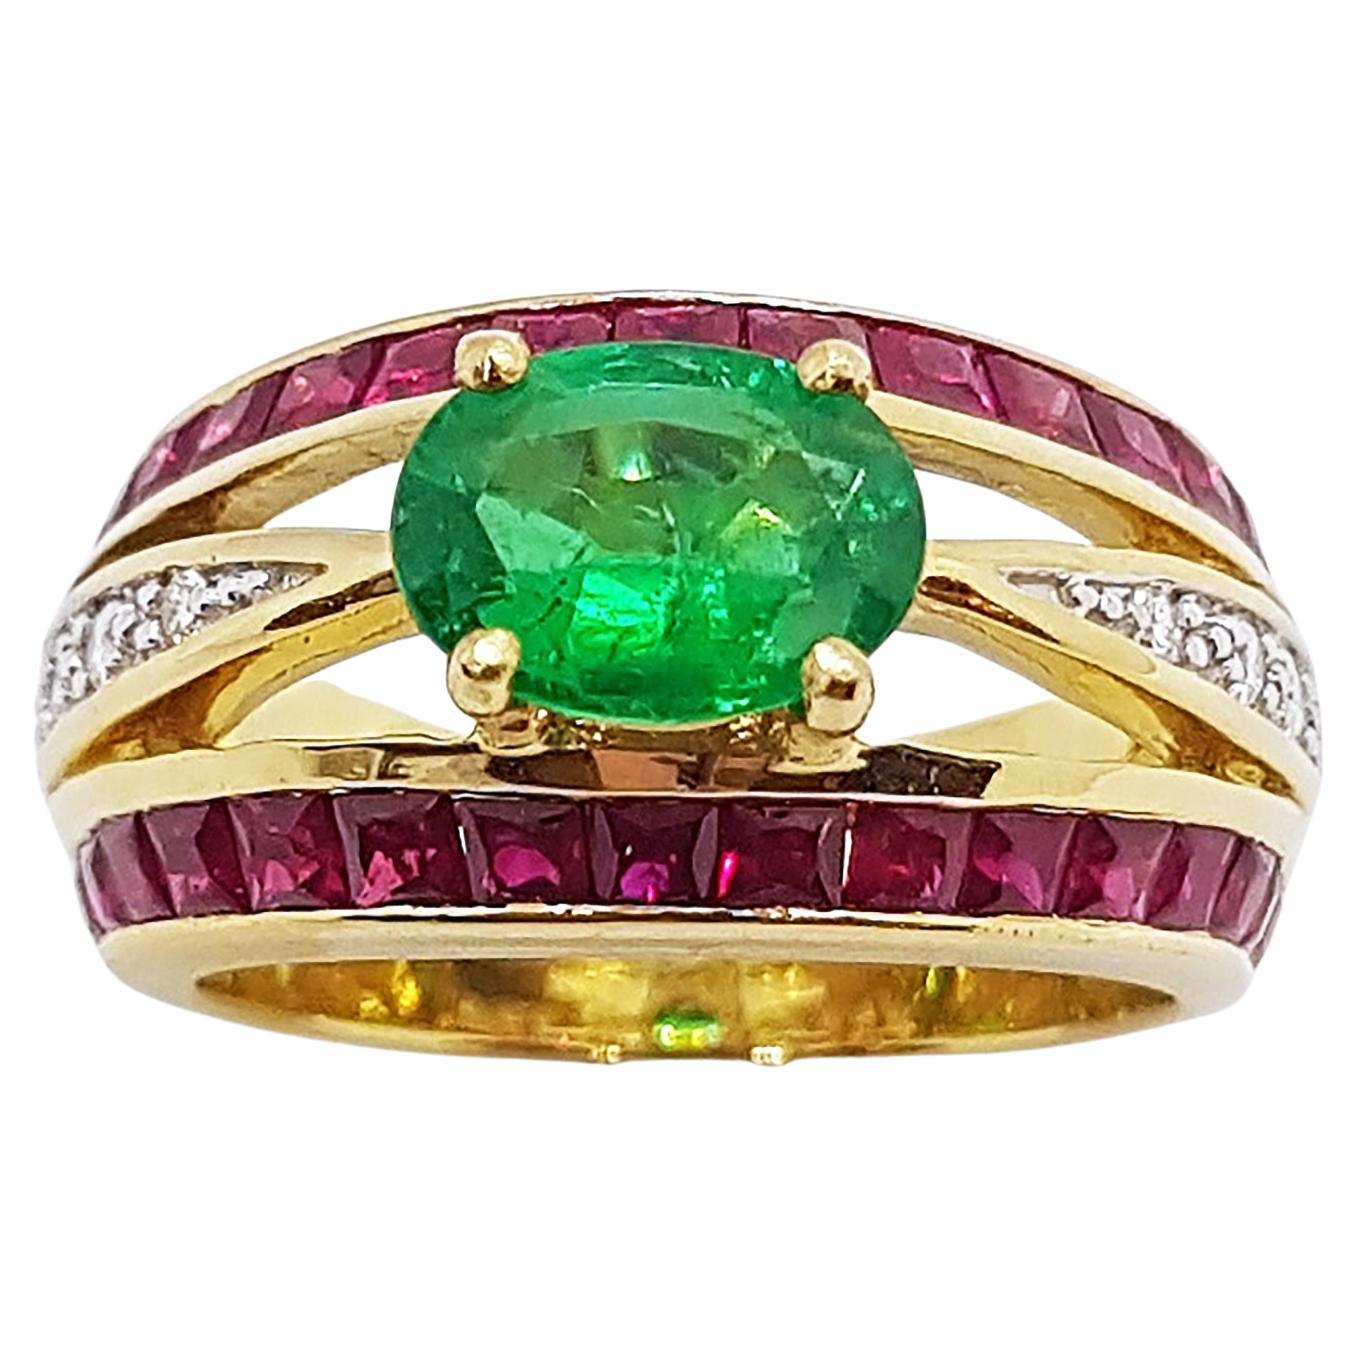 Emerald with Ruby and Diamond Ring Set in 18 Karat Gold Settings